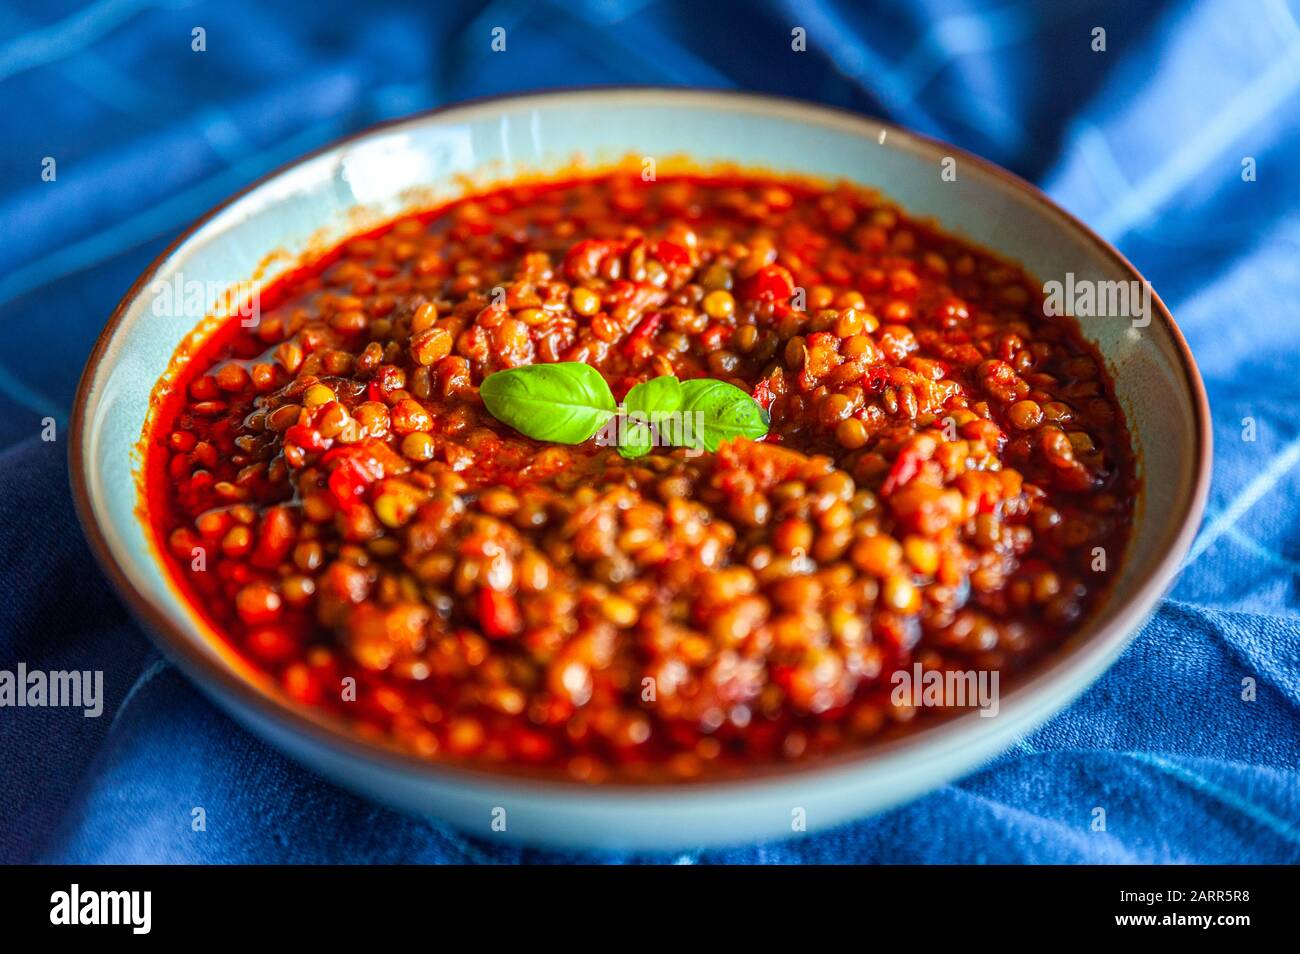 Traditional turkish lentil dish topped with herbs Stock Photo